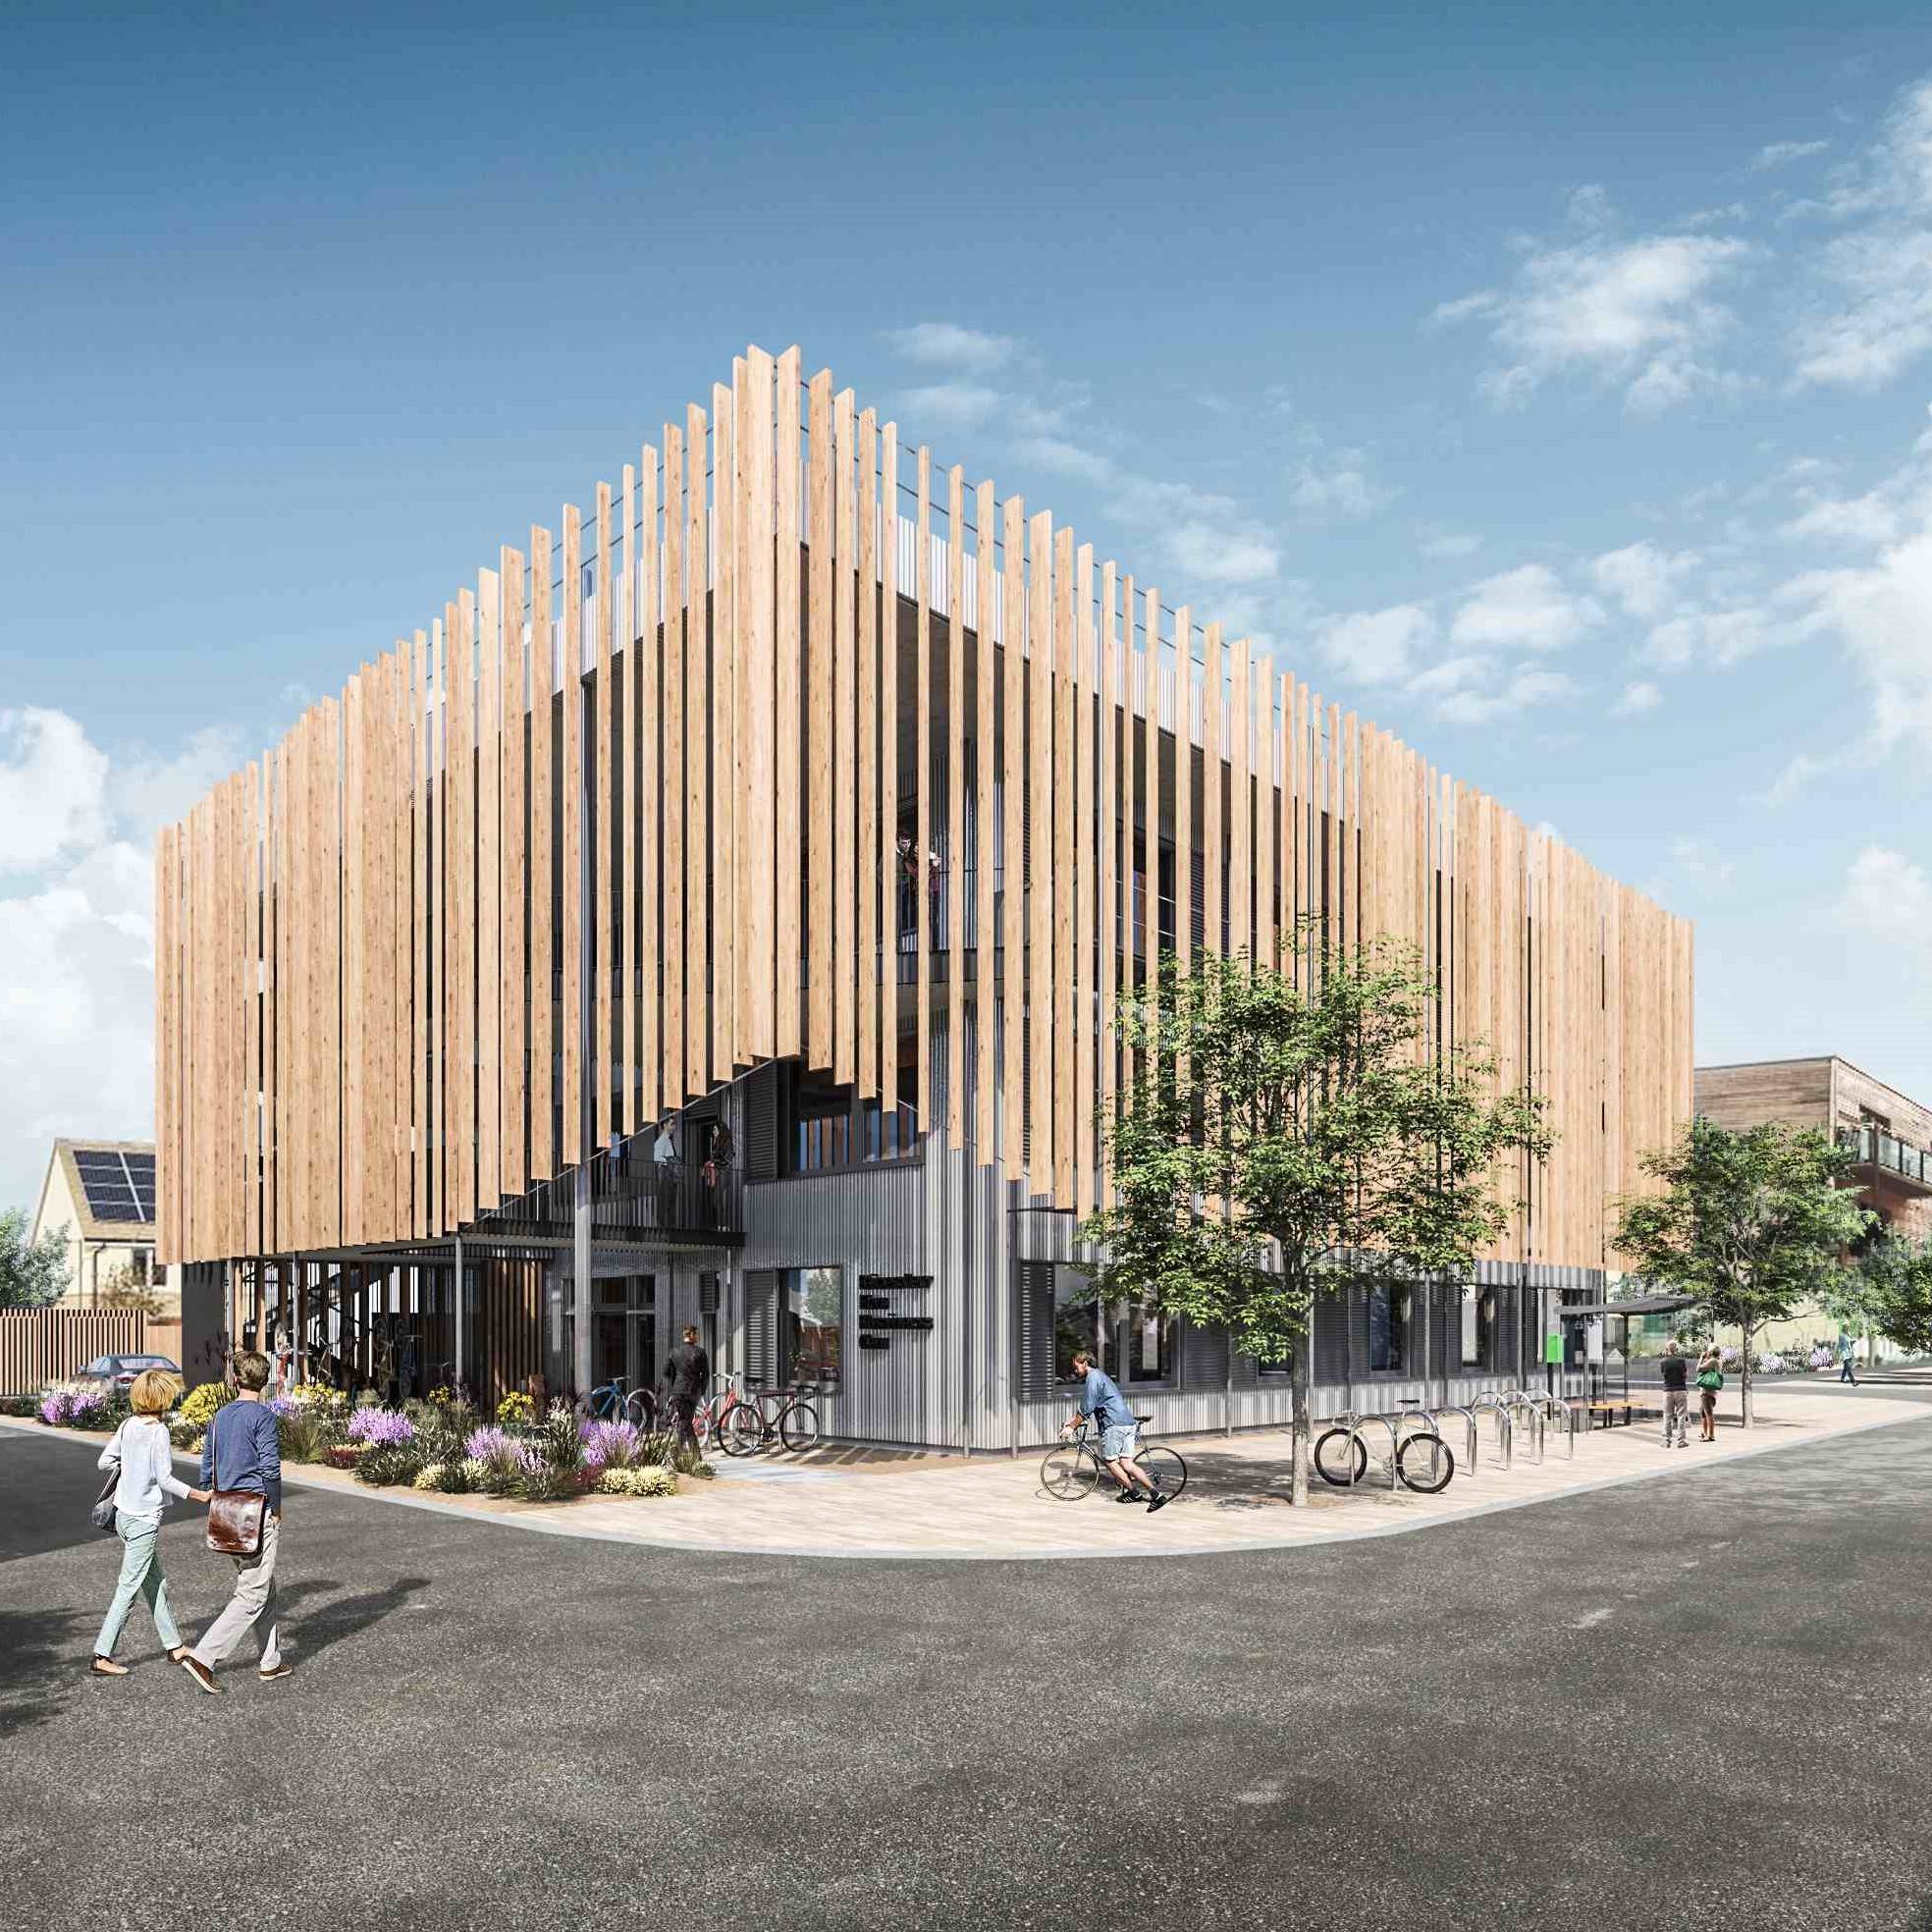 New eco coworking centre breaks ground in Oxfordshire